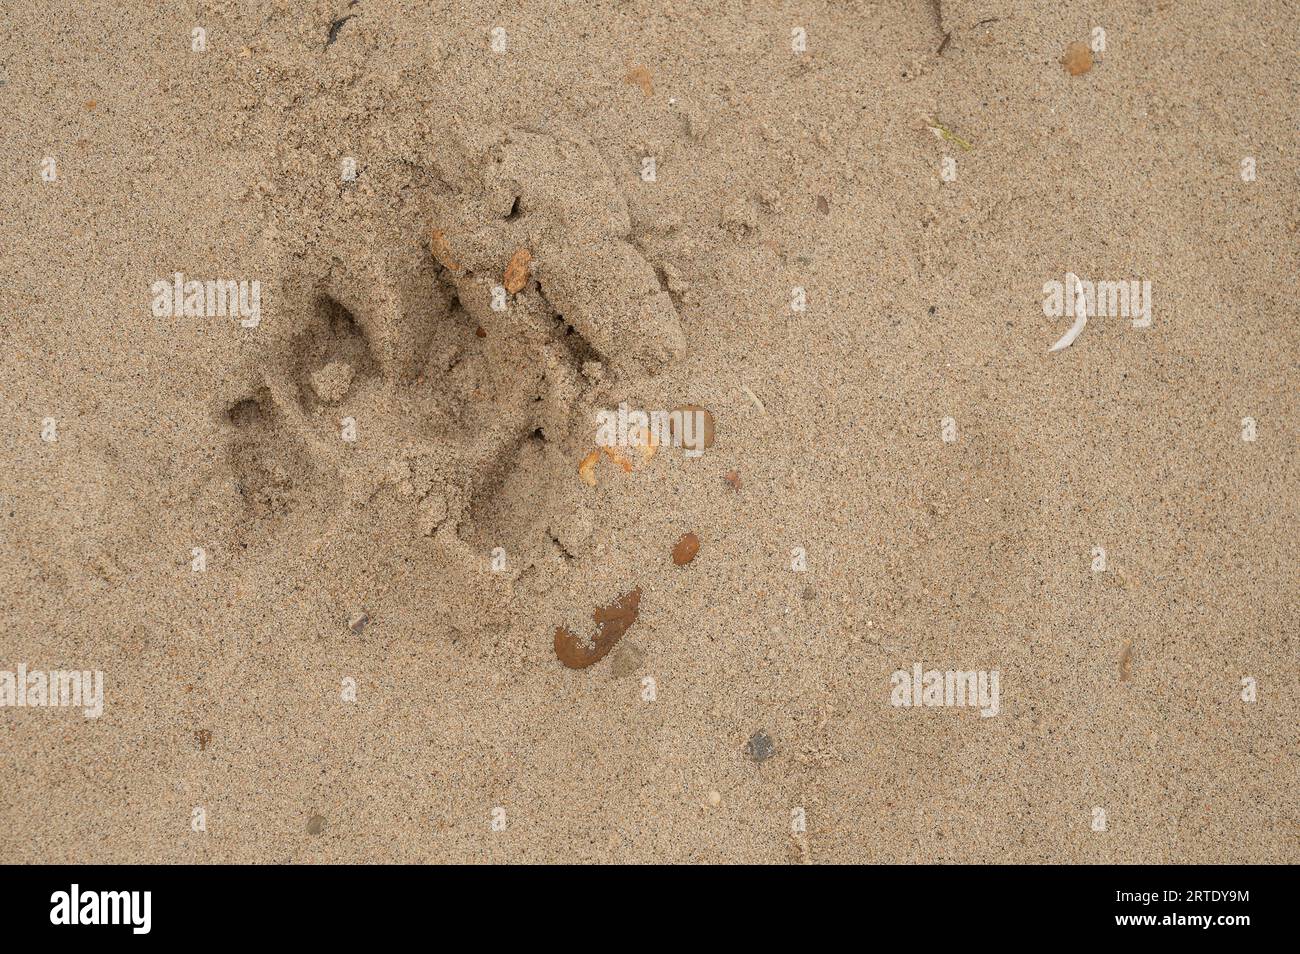 trace of a dog's paw pads and claws in the sand Stock Photo